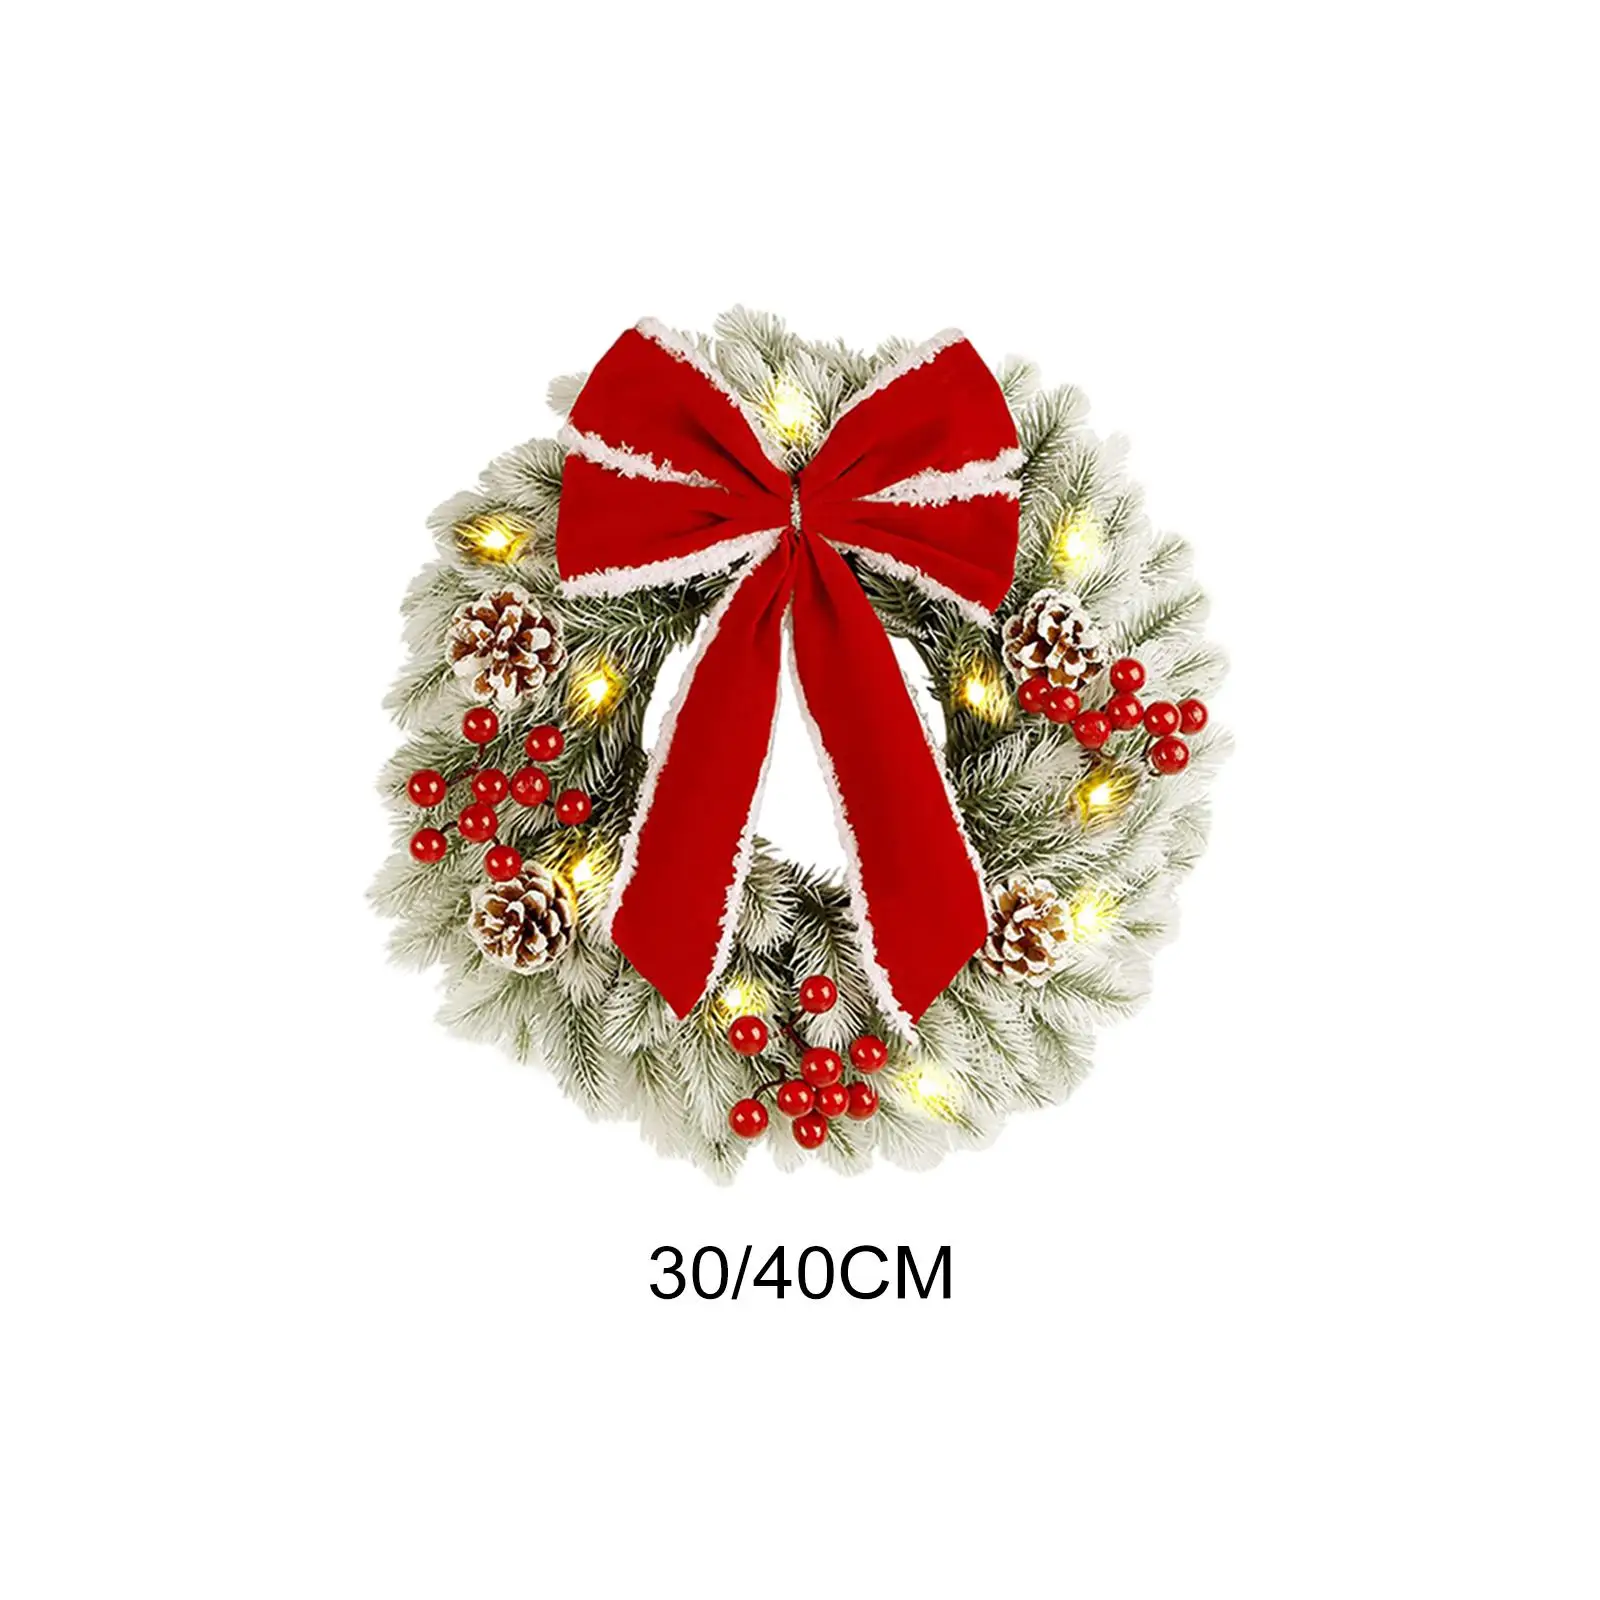 Christmas Wreath Party Festival Decorative Christmas Garland Hanging Artificial Decoration for Home Party Office Wall Decor